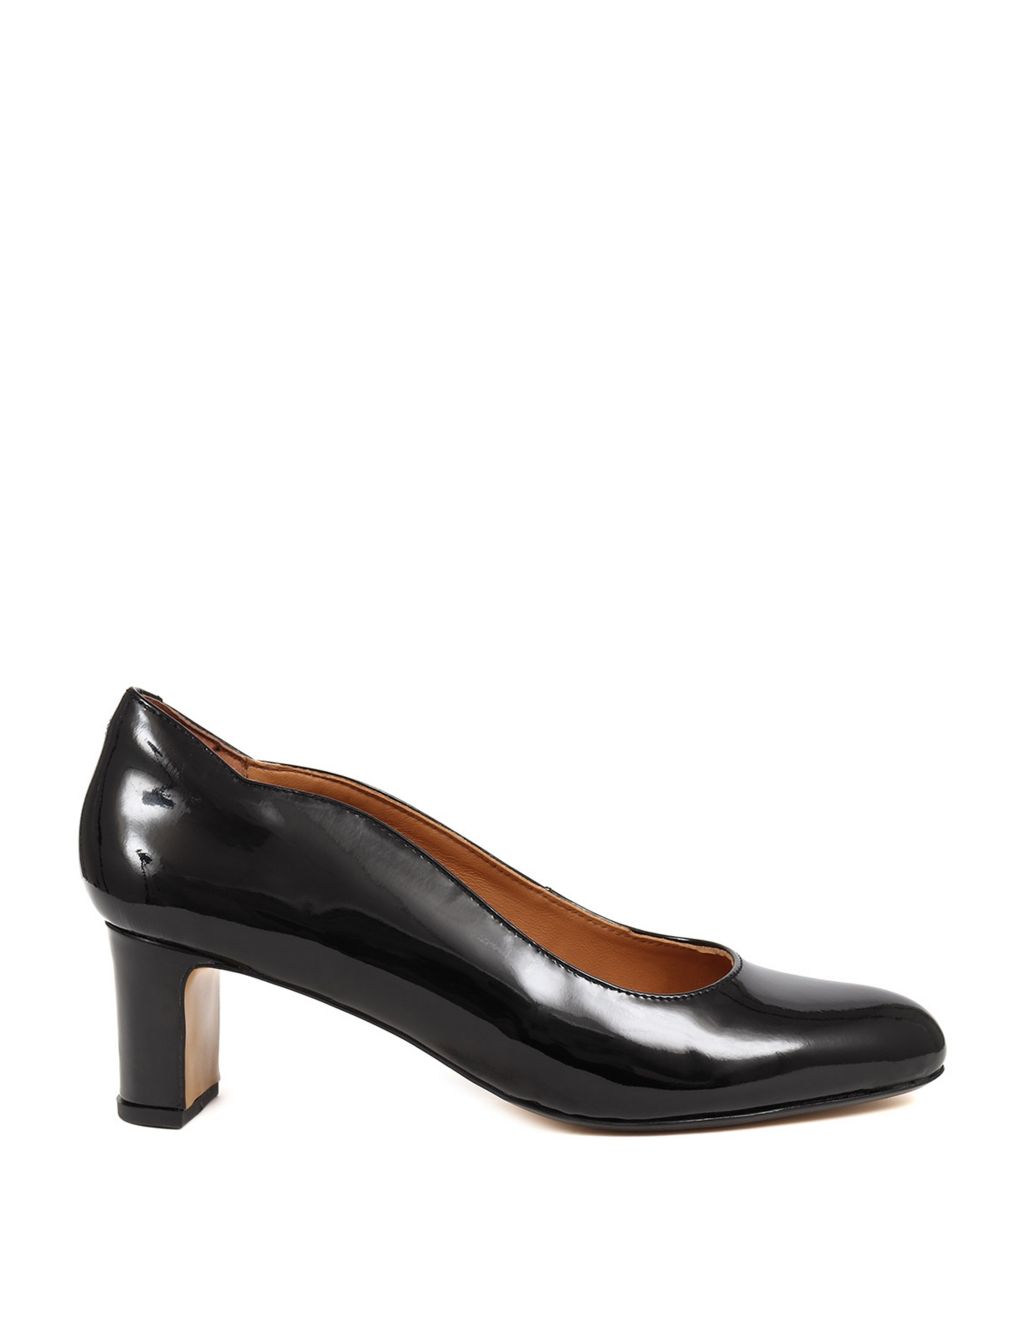 Leather Patent Block Heel Court Shoes image 2